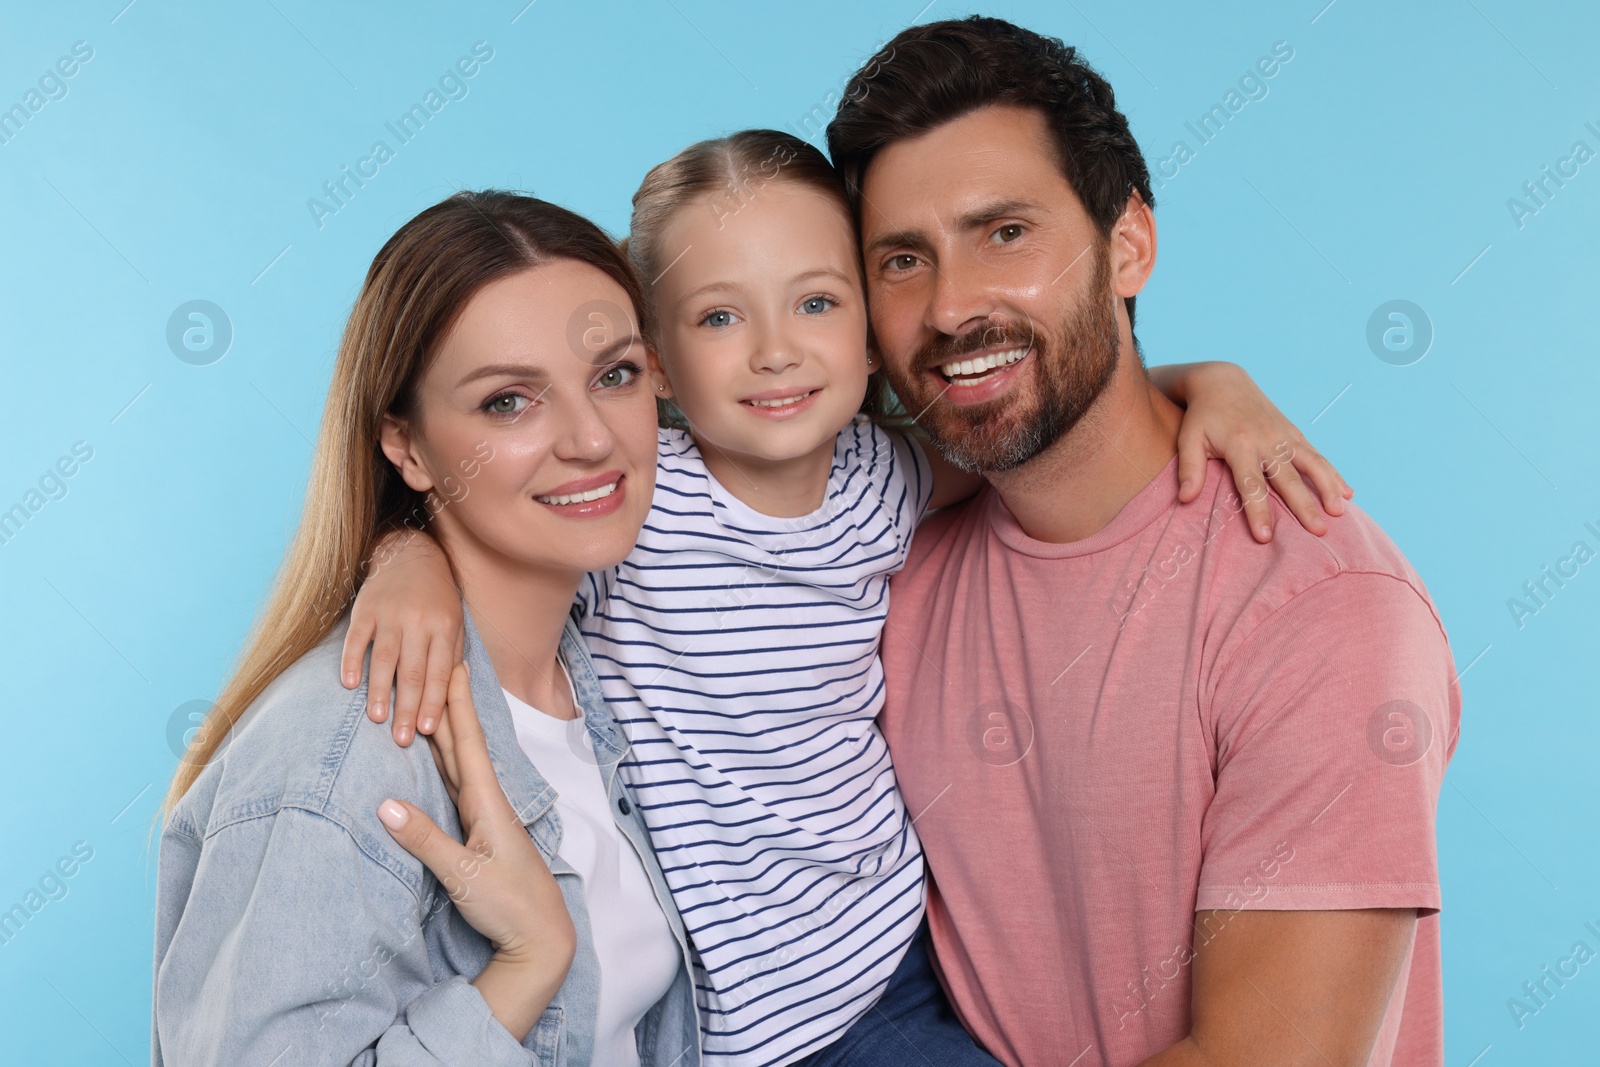 Photo of Happy family together on light blue background